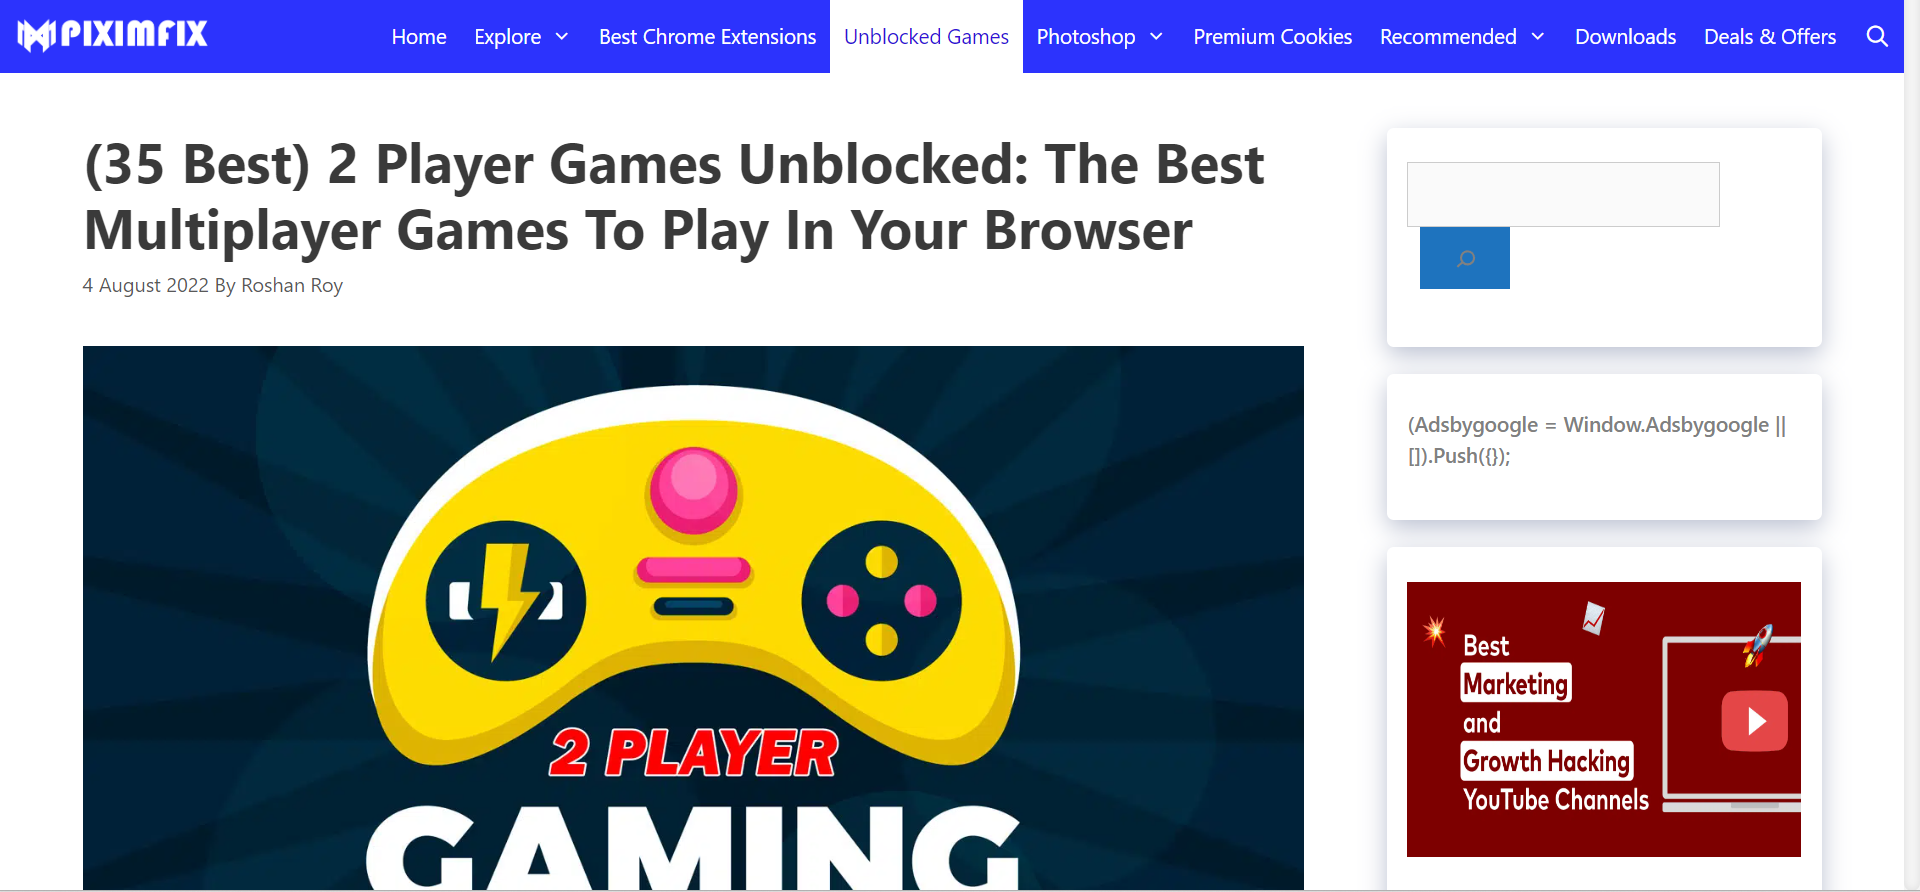 2 Player Games Unblocked: The Best Online Multiplayer Games